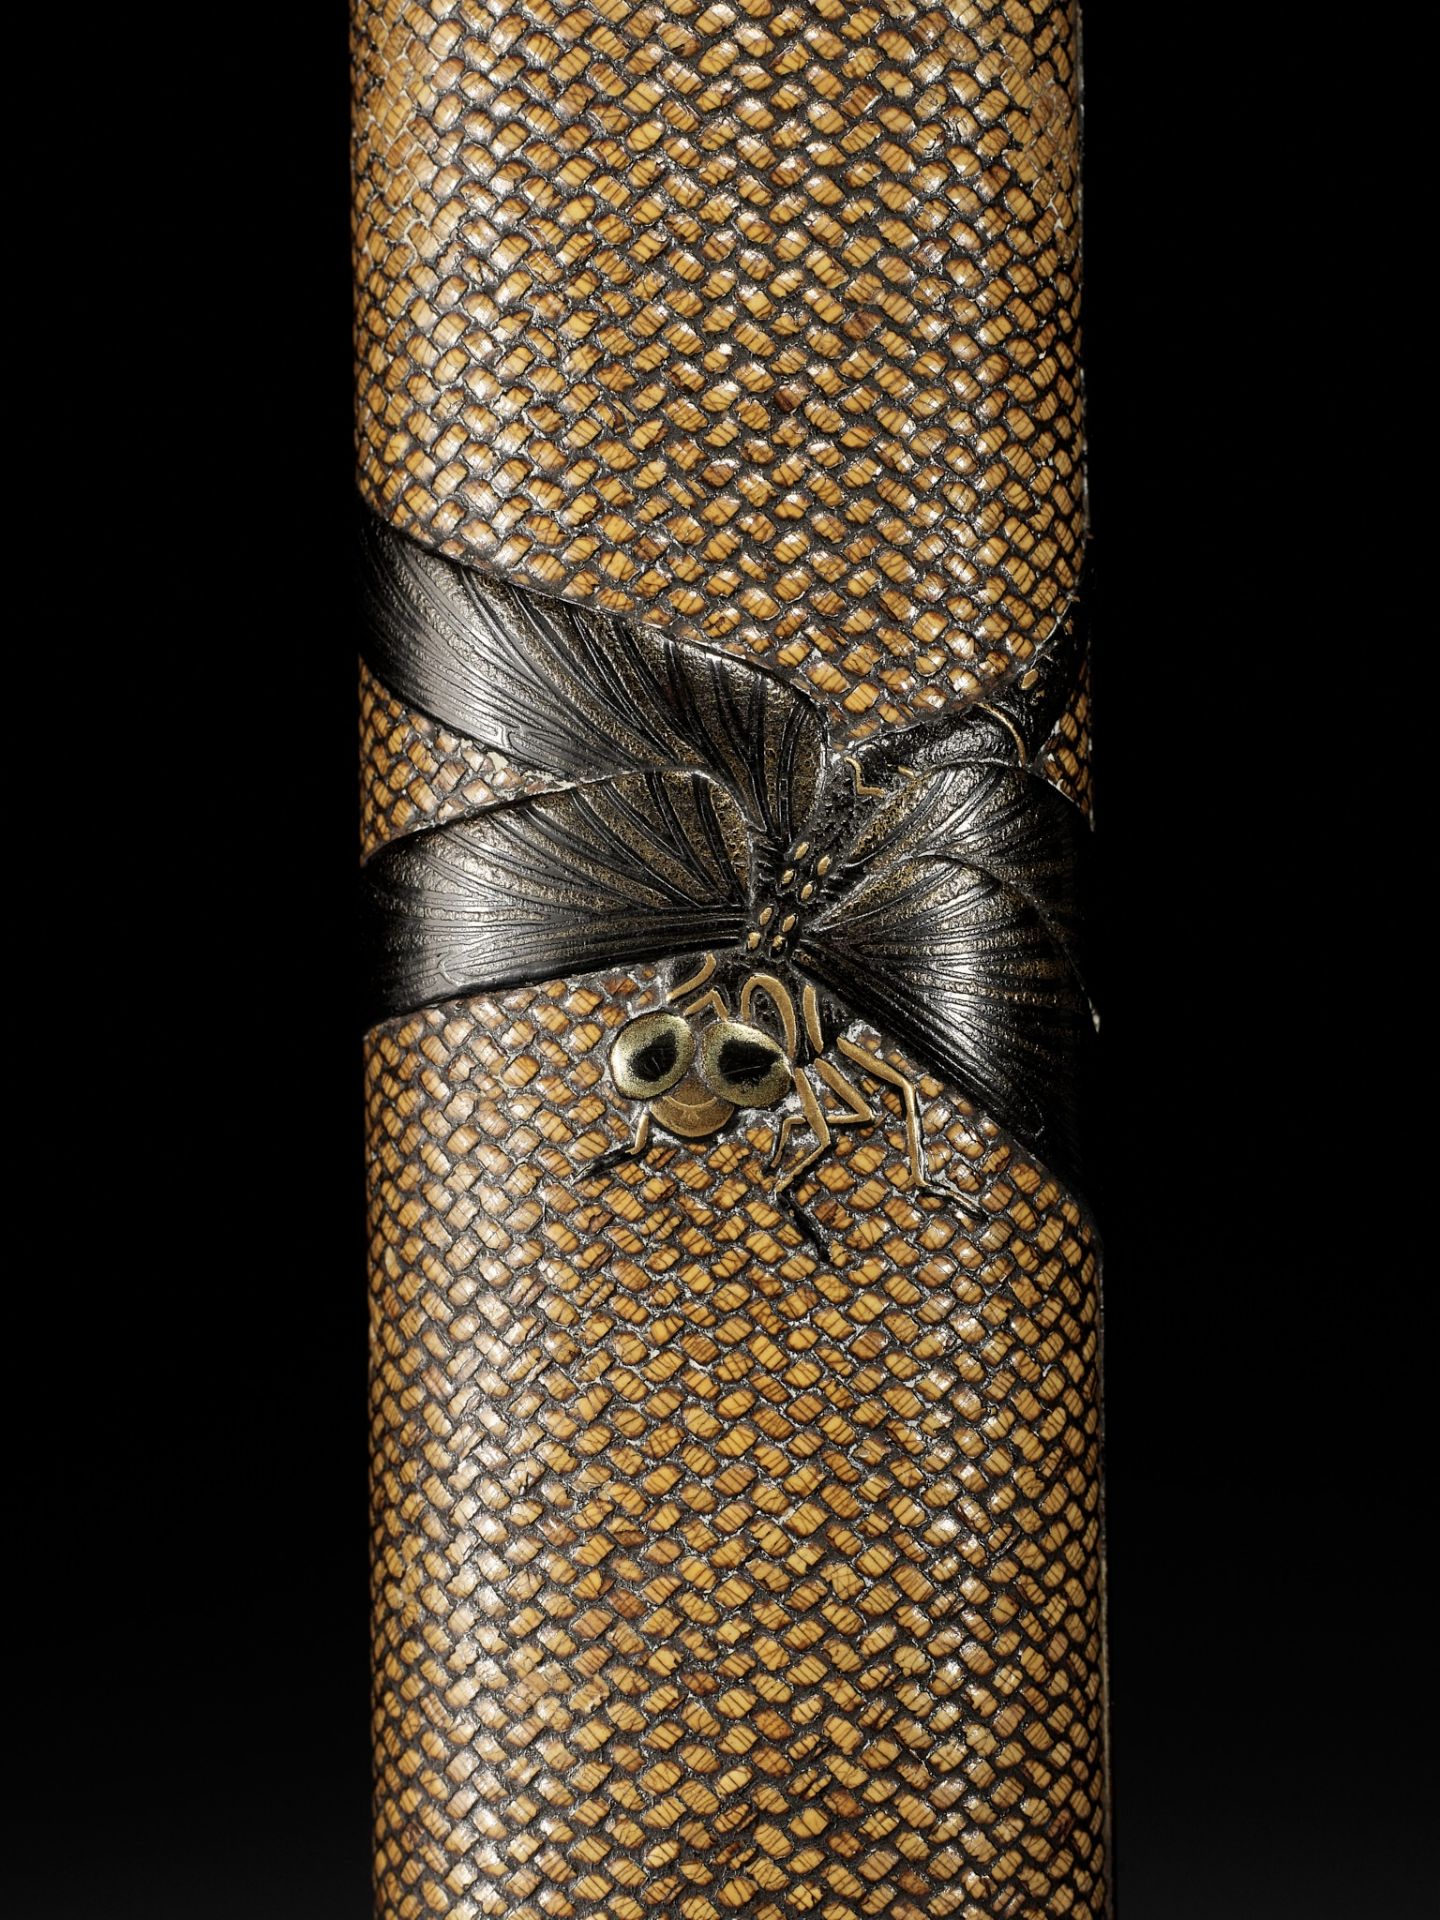 A FINE RATTAN AND LACQUER KISERUZUTSU WITH DRAGONFLIES